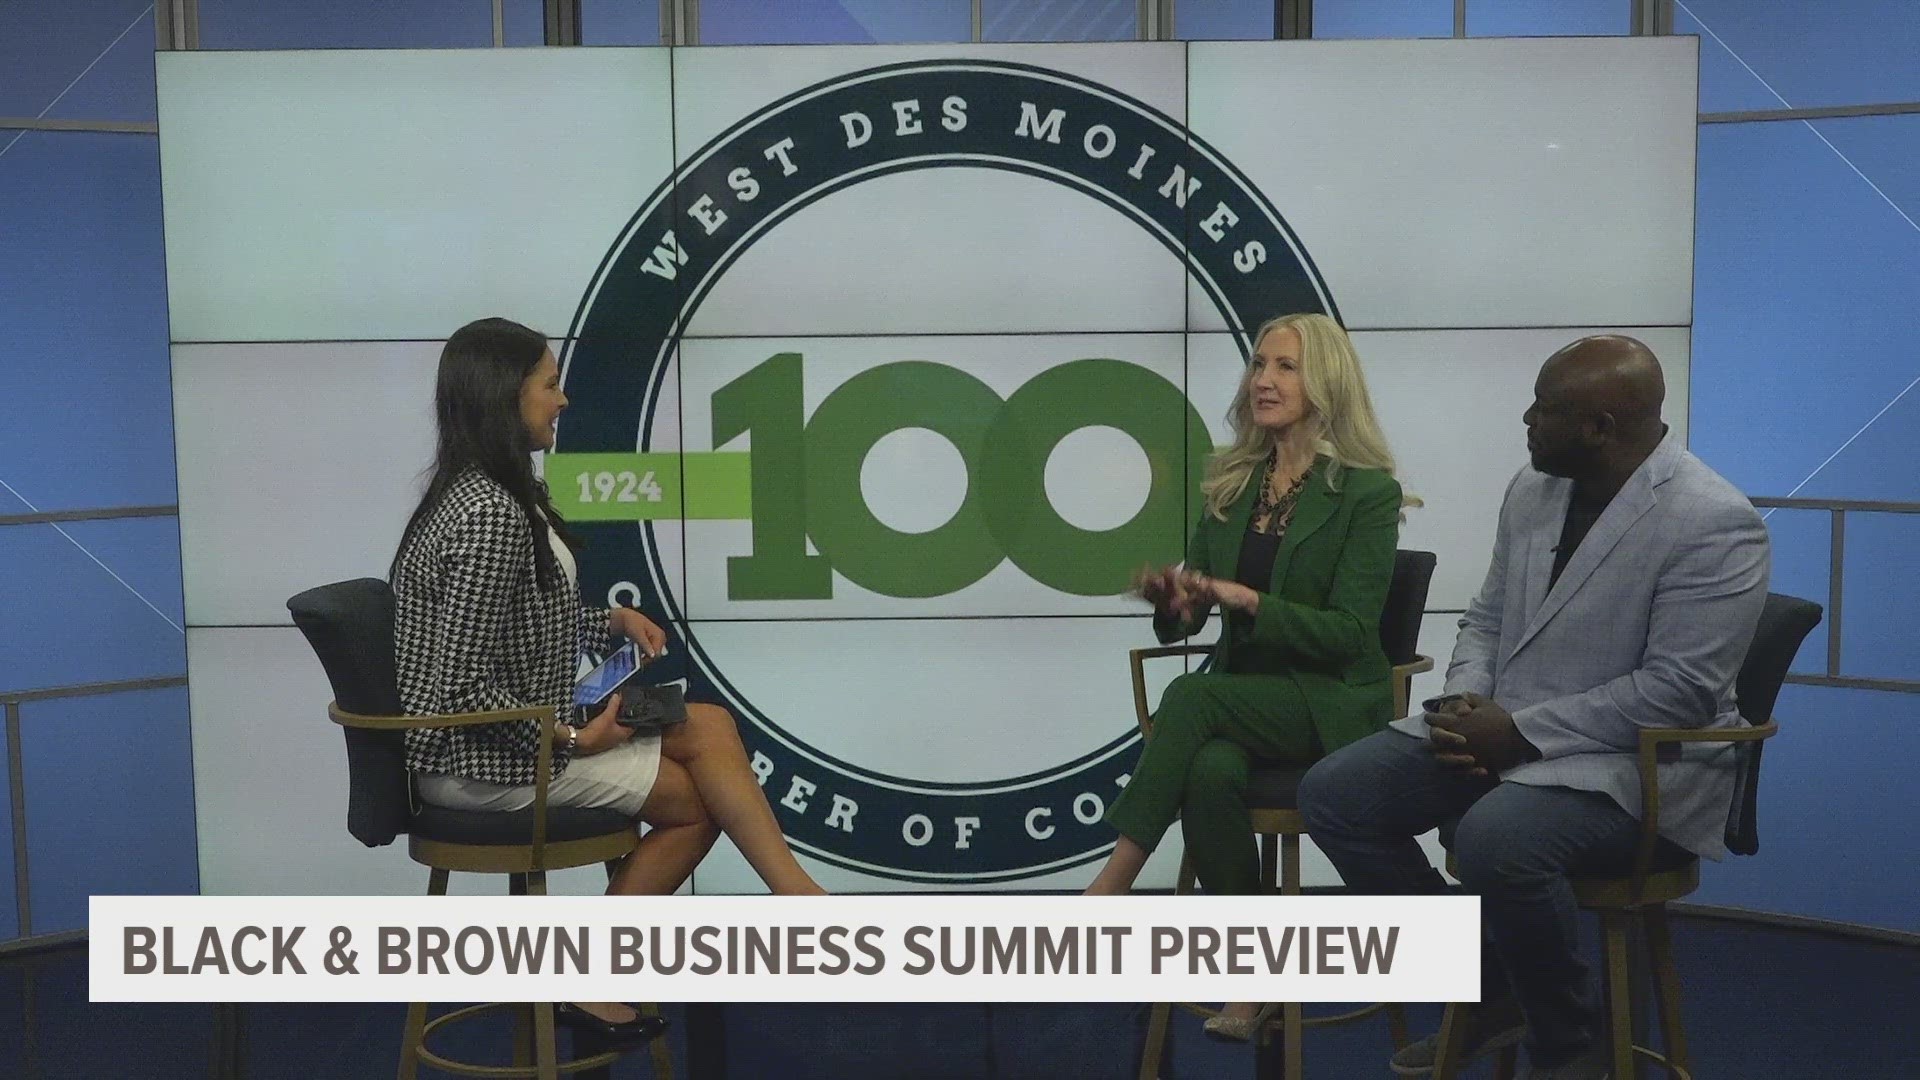 The Athene Black & Brown Business Summit is a two-day hybrid event bringing people together to discuss strategies for building and growing minority-owned businesses.